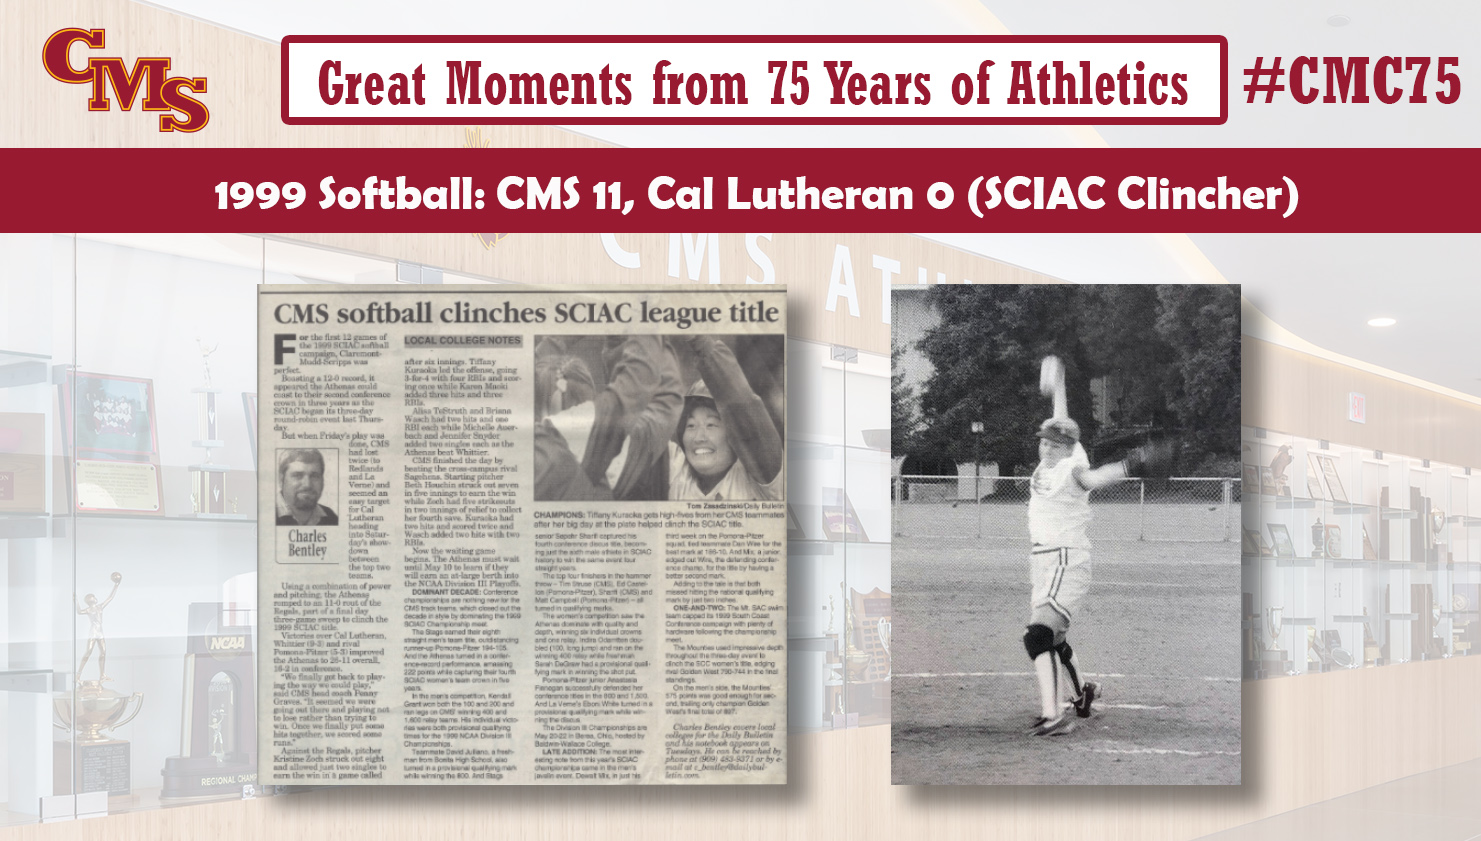 A newspaper clipping from 1999 that says CMS Softball clinches SCIAC league title, along with a picture of Kristine Zoch. The words over the photo read: Great Moments from 75 Years of Athletics, 1999 Softball: CMS 11, Cal Lutheran 0 (SCIAC Clincher)